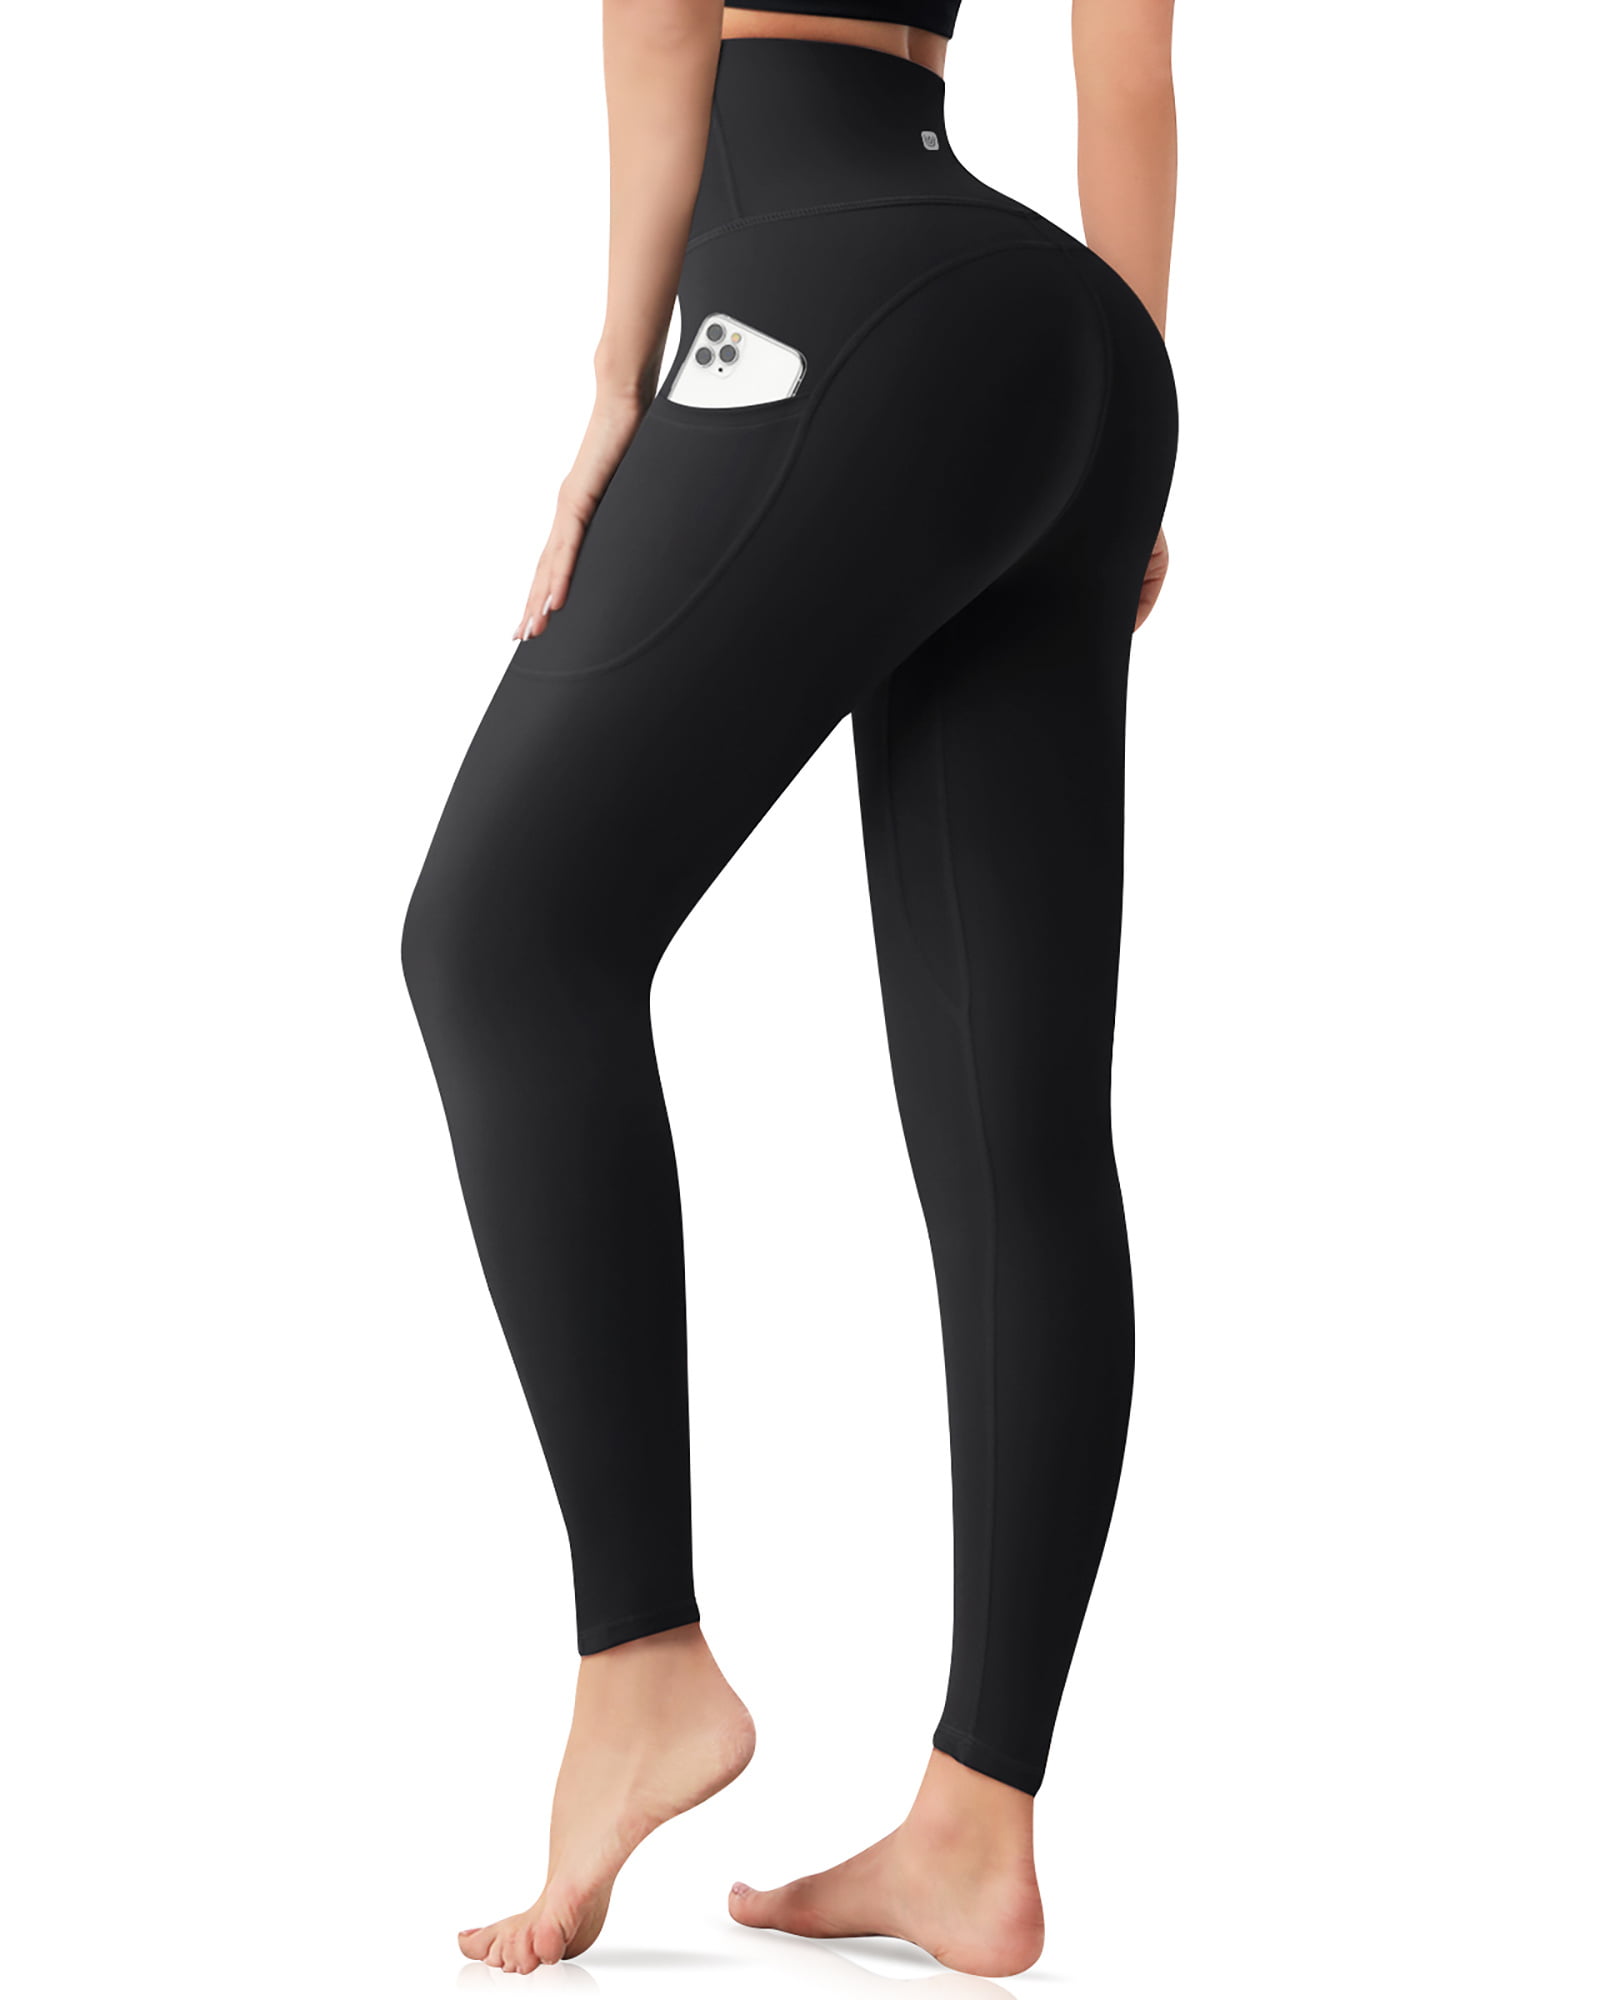 UUE 28Inseam Black Leggings with Pockets for Women, High Waisted Yoga Pants  Tummy Control, Workout Tights Leggings Full Length 